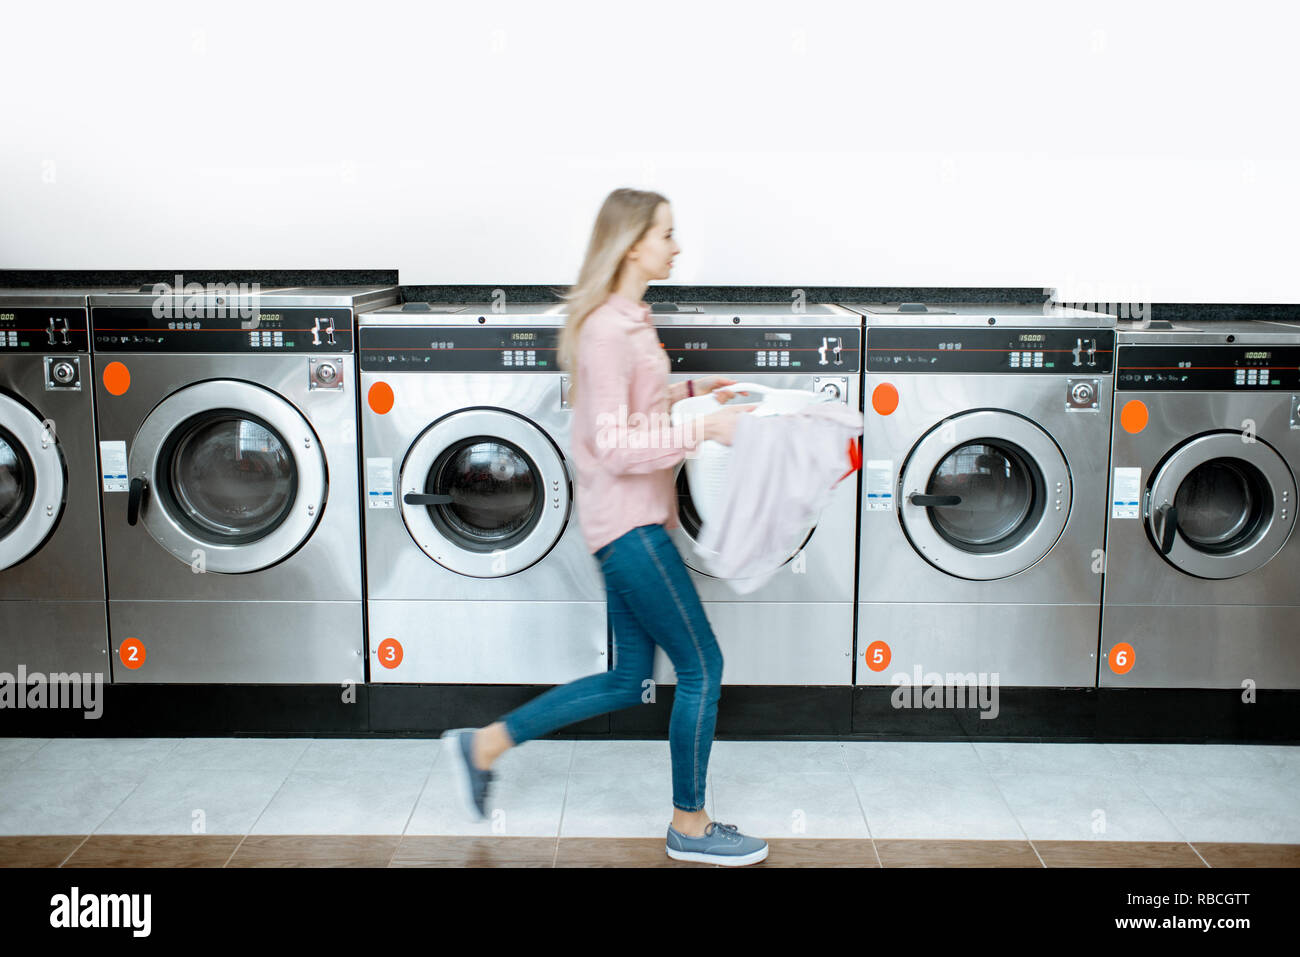 Woman walking with clothes at the self service laundry with washing machines on the background, motion blurred woman Stock Photo